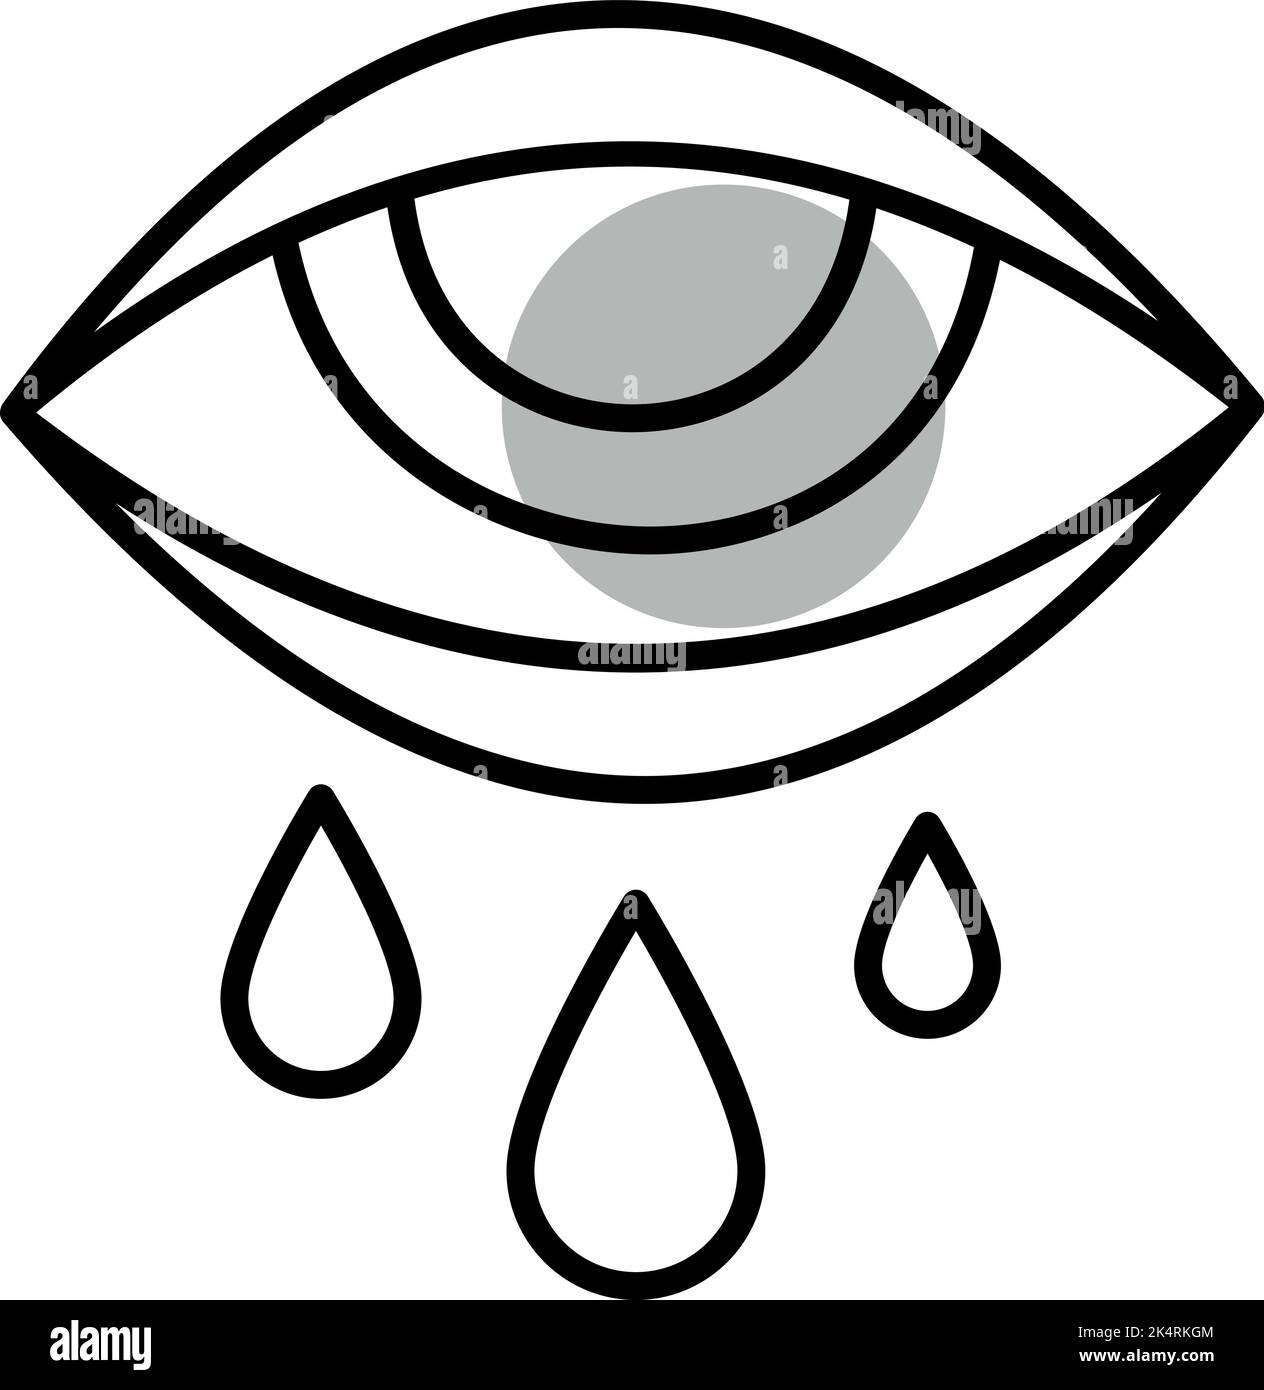 Crying eye, illustration, vector on a white background. Stock Vector